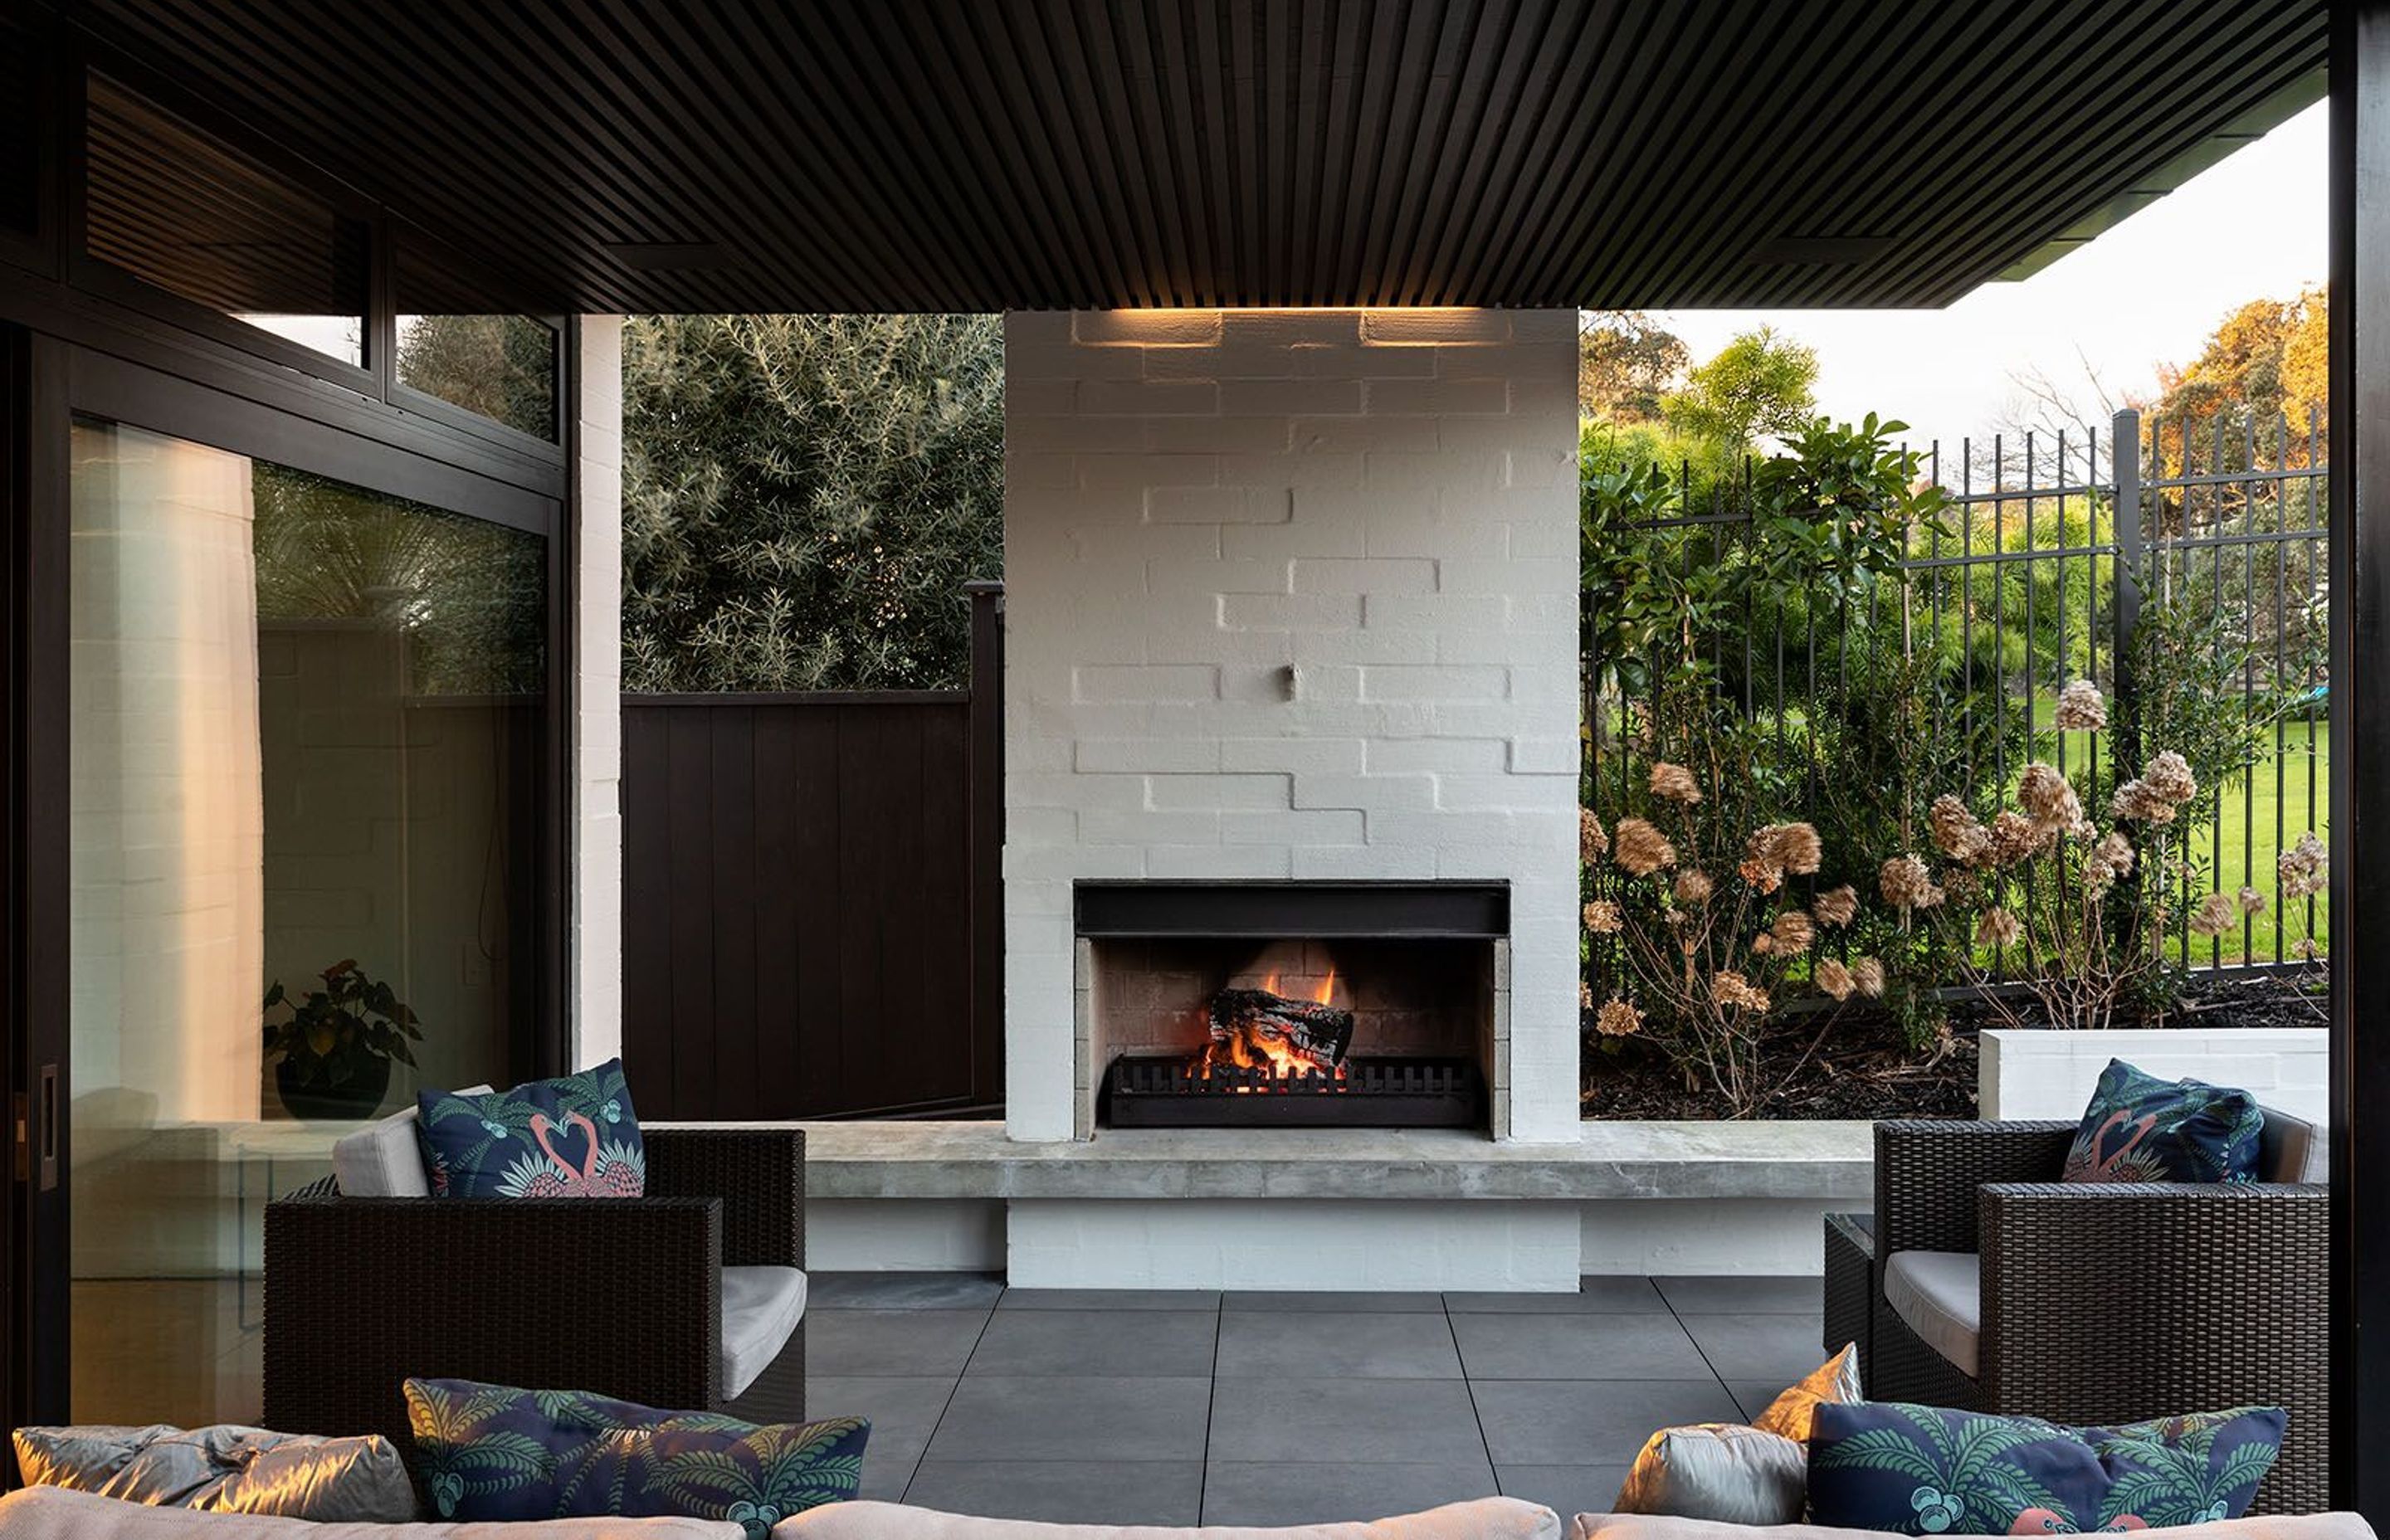 The traditional nature of the concrete block fireplace brings an elemental feeling into the outdoor space.